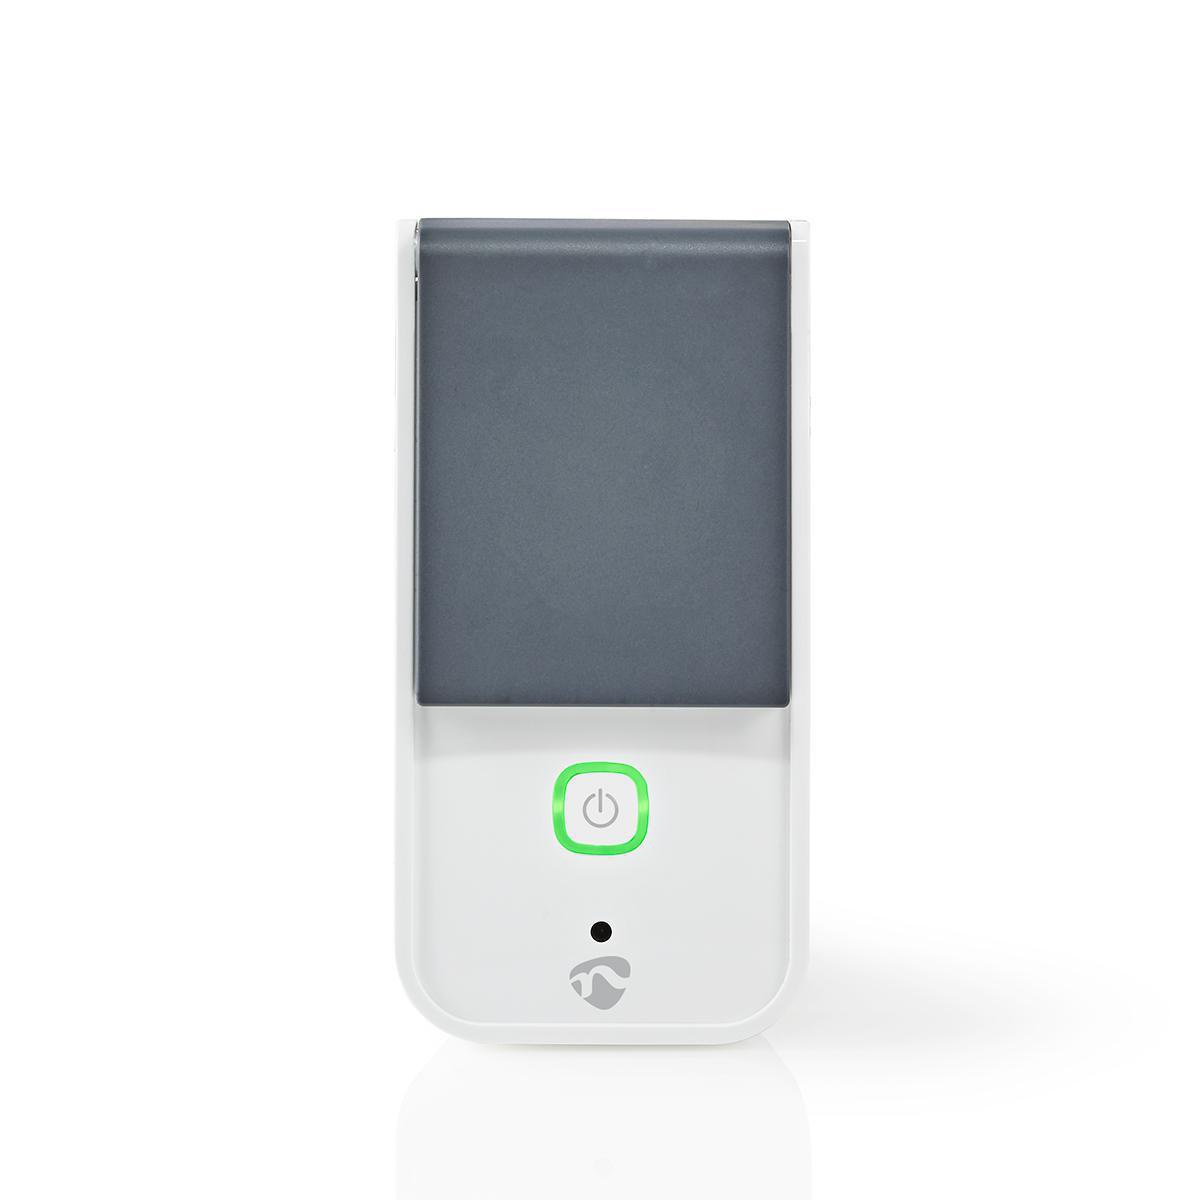 Remotely control any outdoor device by simply connecting it to this wireless smart socket and connecting your smartphone or tablet to your Wi-Fi router. Easy to set up You really don't have to be a technical miracle or electrician to operate and automate